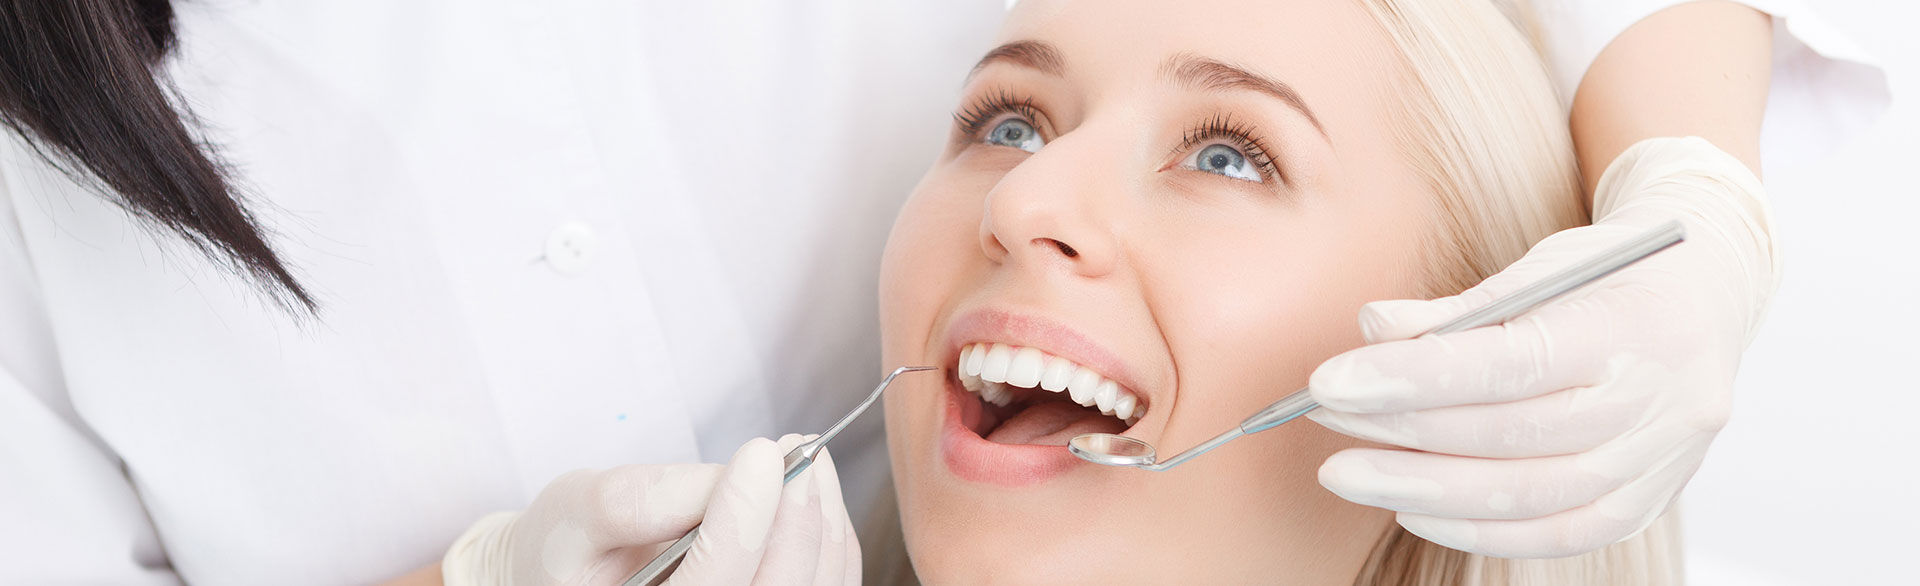 woman receiving a dental cleaning